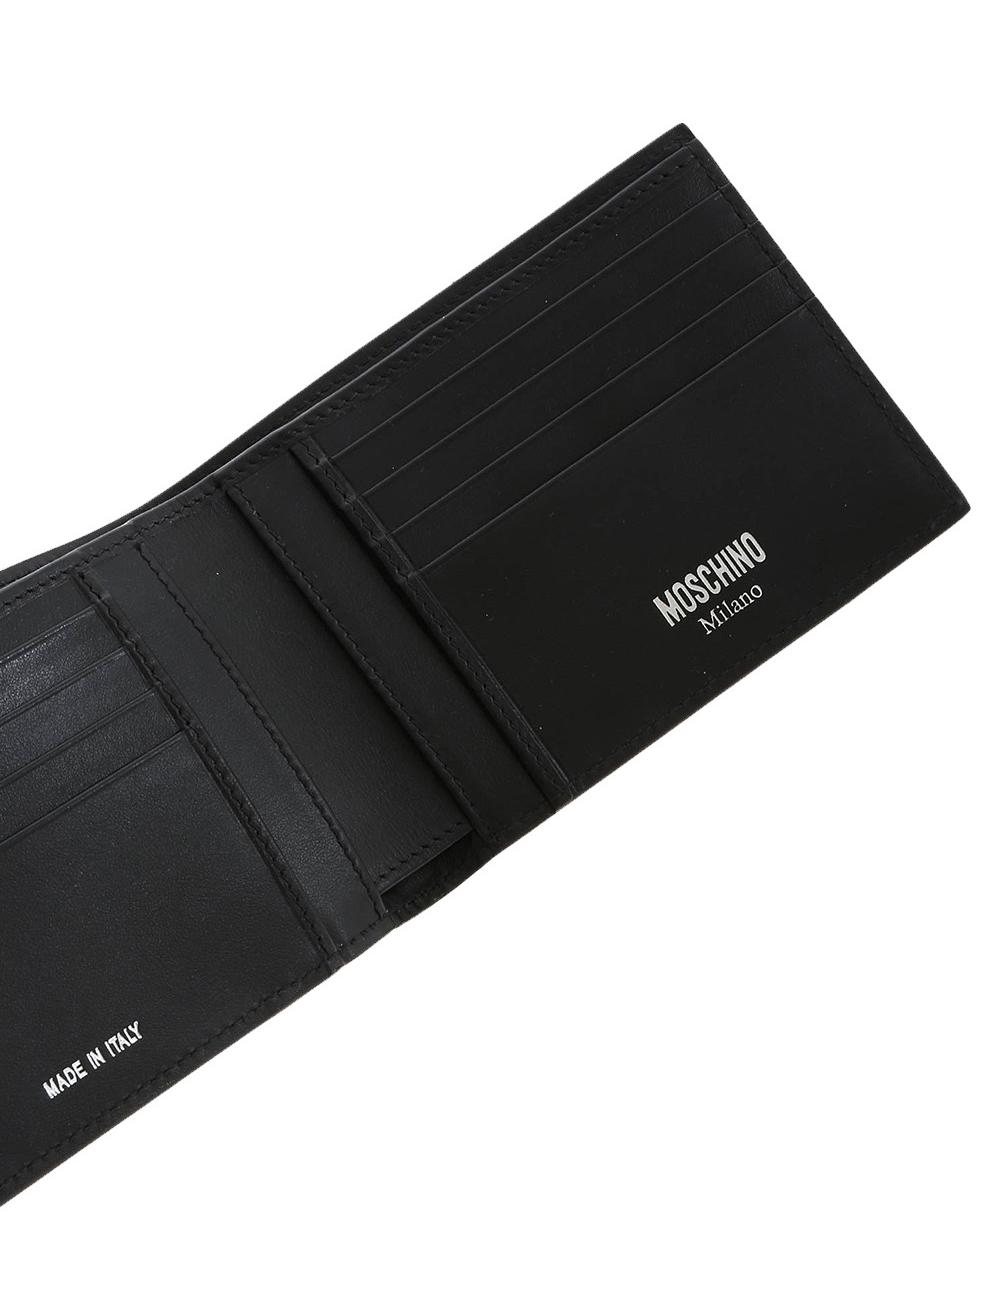 Genuine leather wallet credit card bifold 